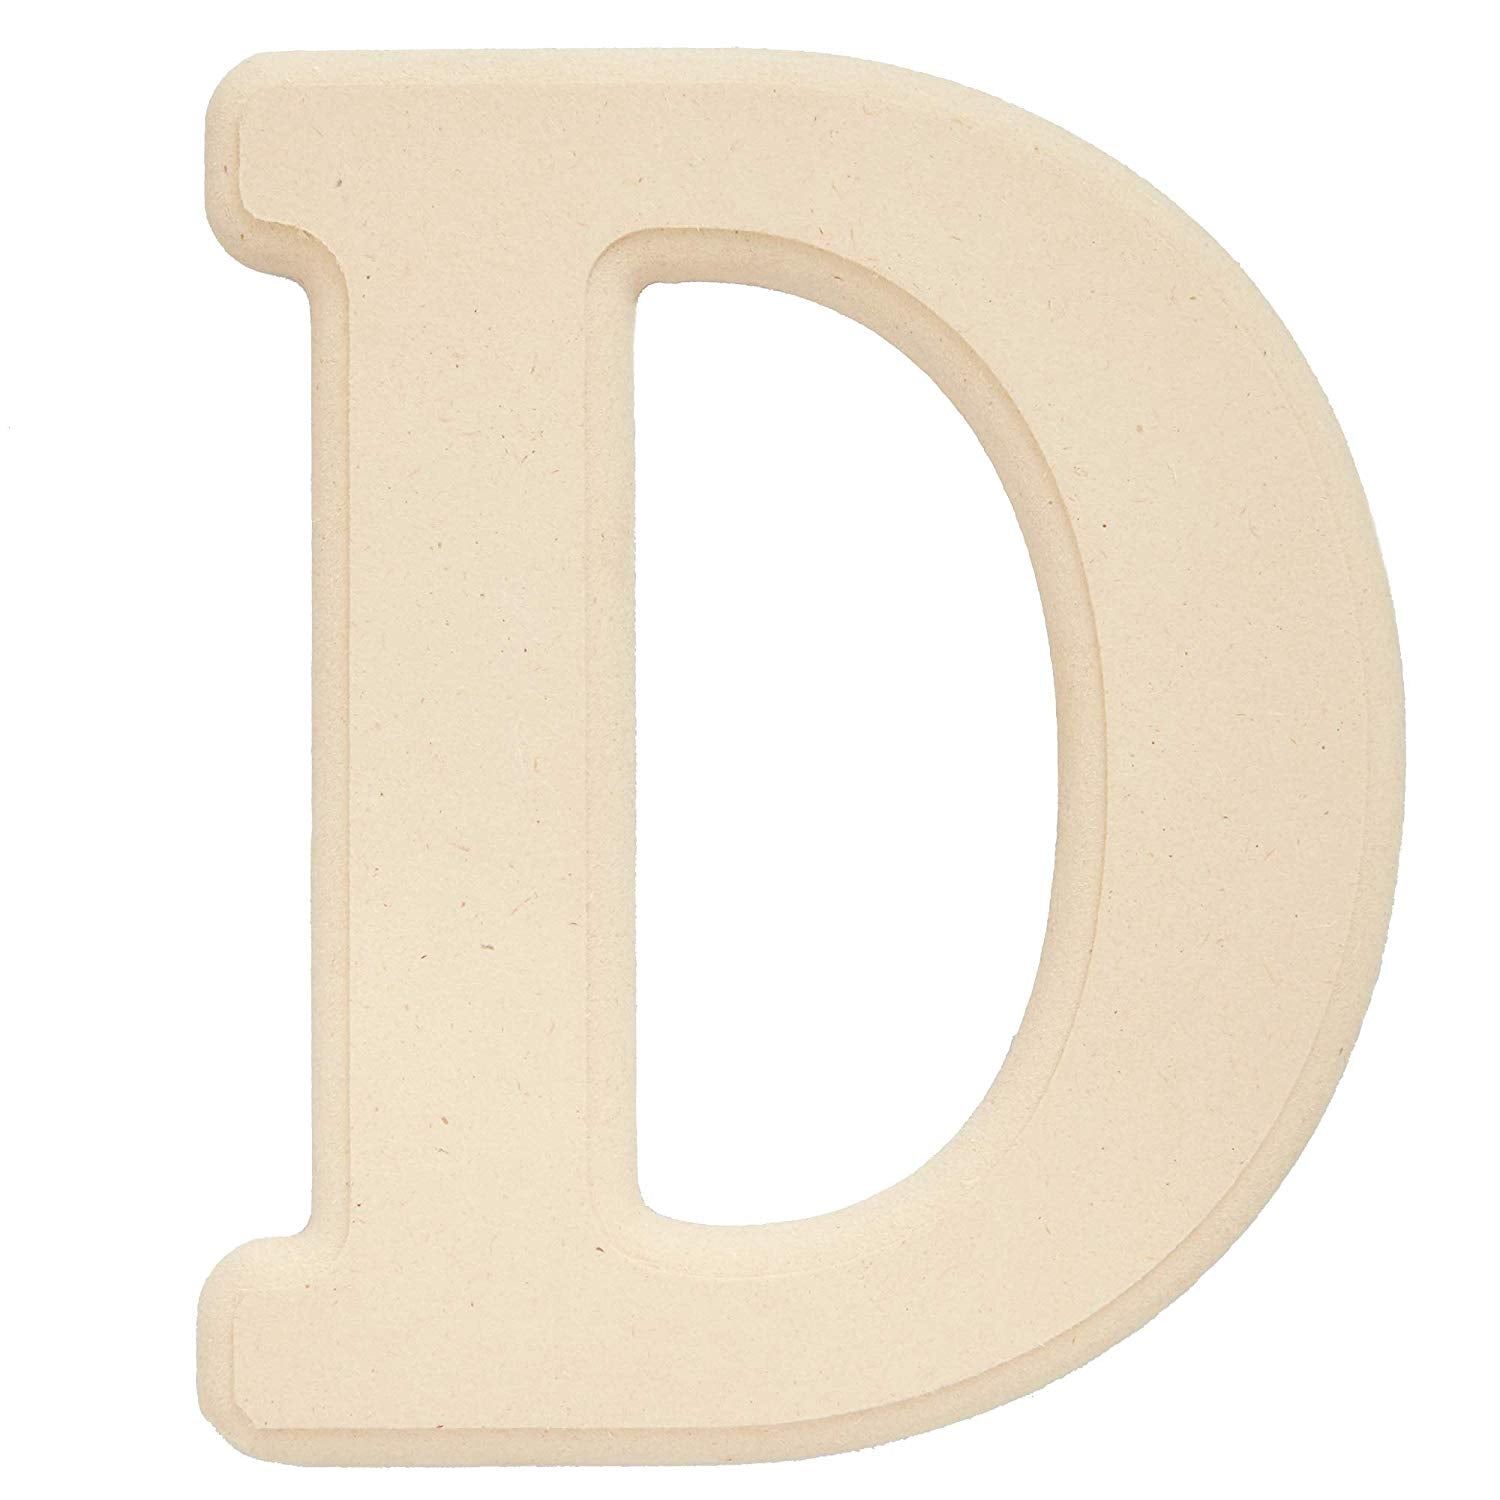 White Wood Letters 3 Inch, Wood Letters for DIY Party Projects (B)